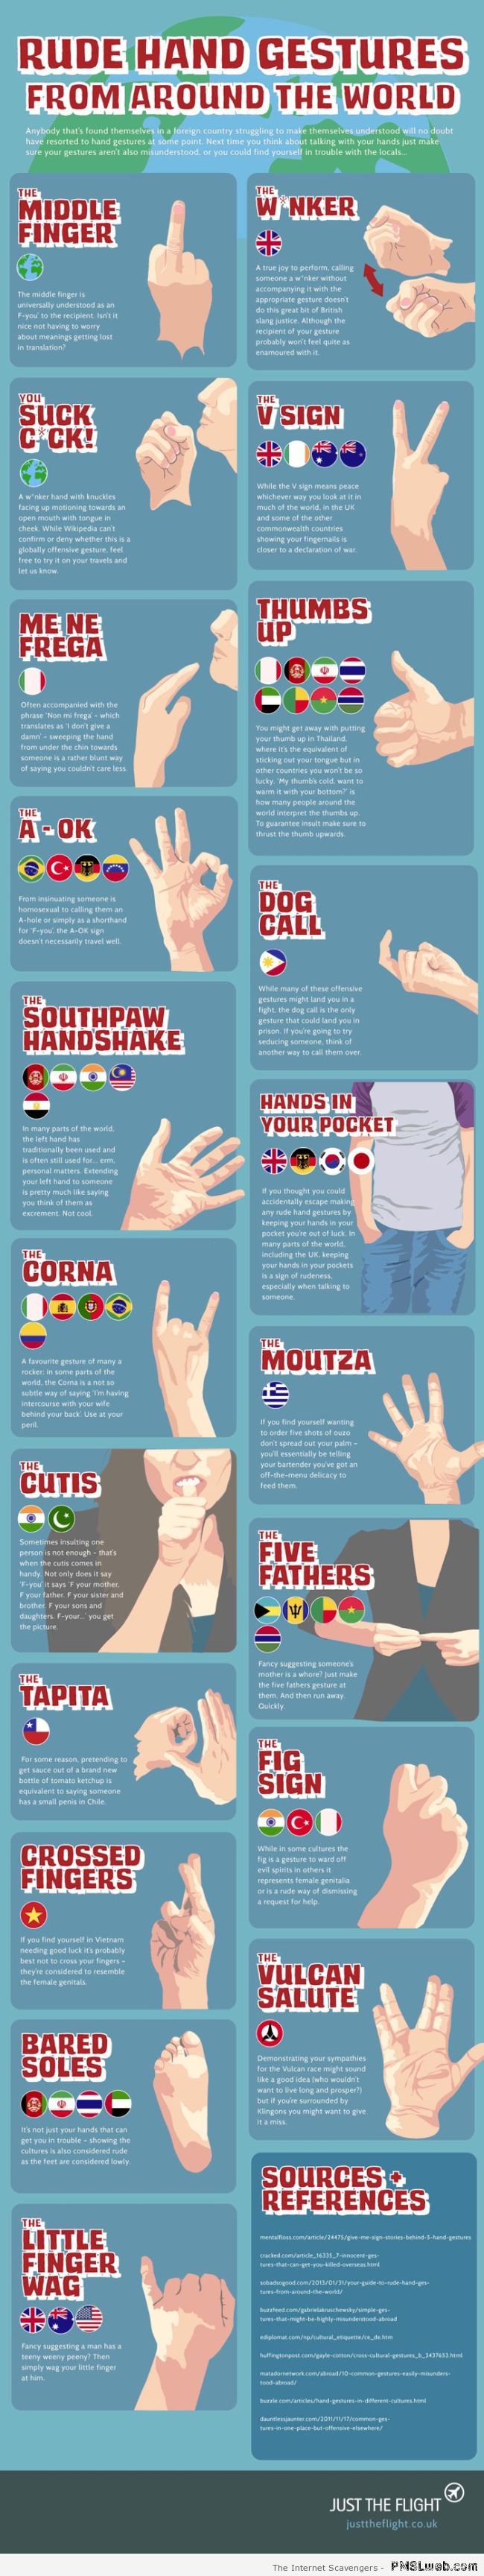 Rude hand gestures from around the world at PMSLweb.com